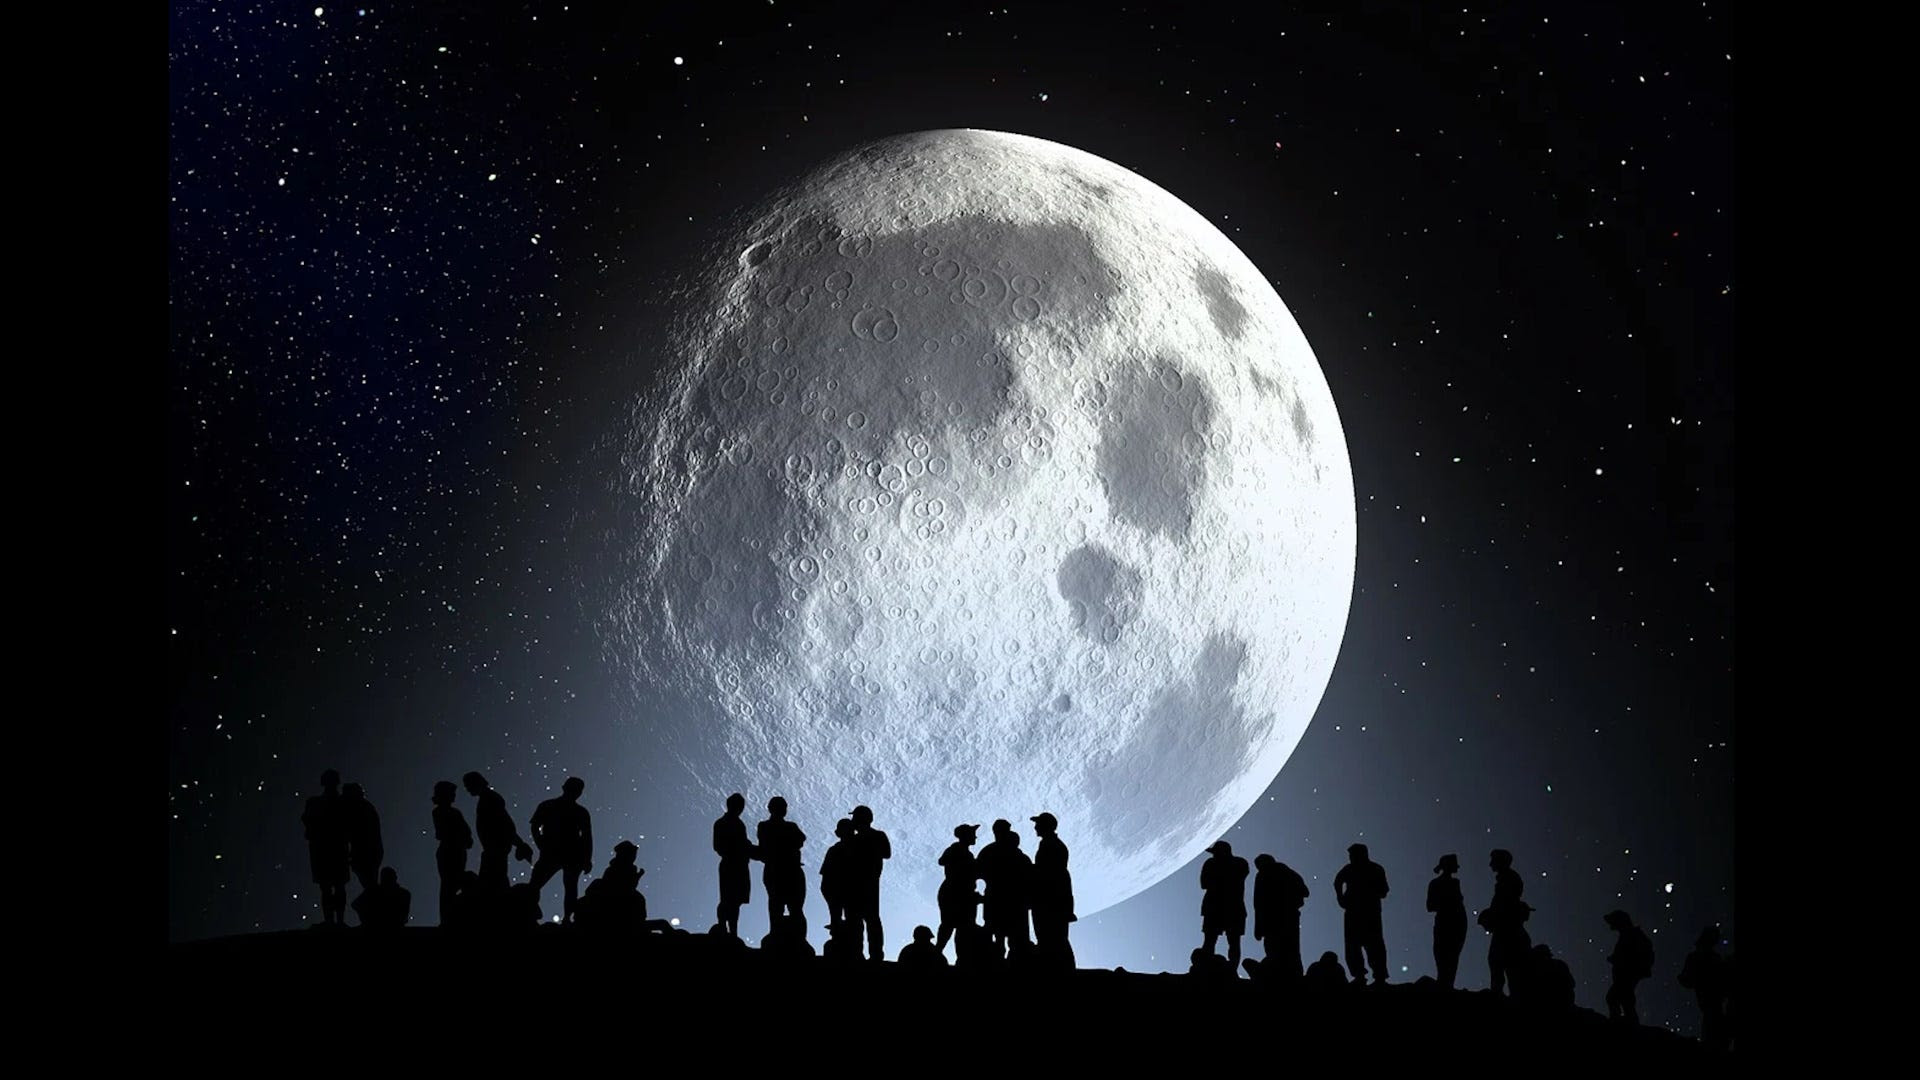 What’s Next to the Moon? – An “Apex Body” and Digital ID to Rule Us All Https%3A%2F%2Fsubstack-post-media.s3.amazonaws.com%2Fpublic%2Fimages%2Fcf4c55ac-d71b-4e16-bb11-8231613c4a5f_1920x1080